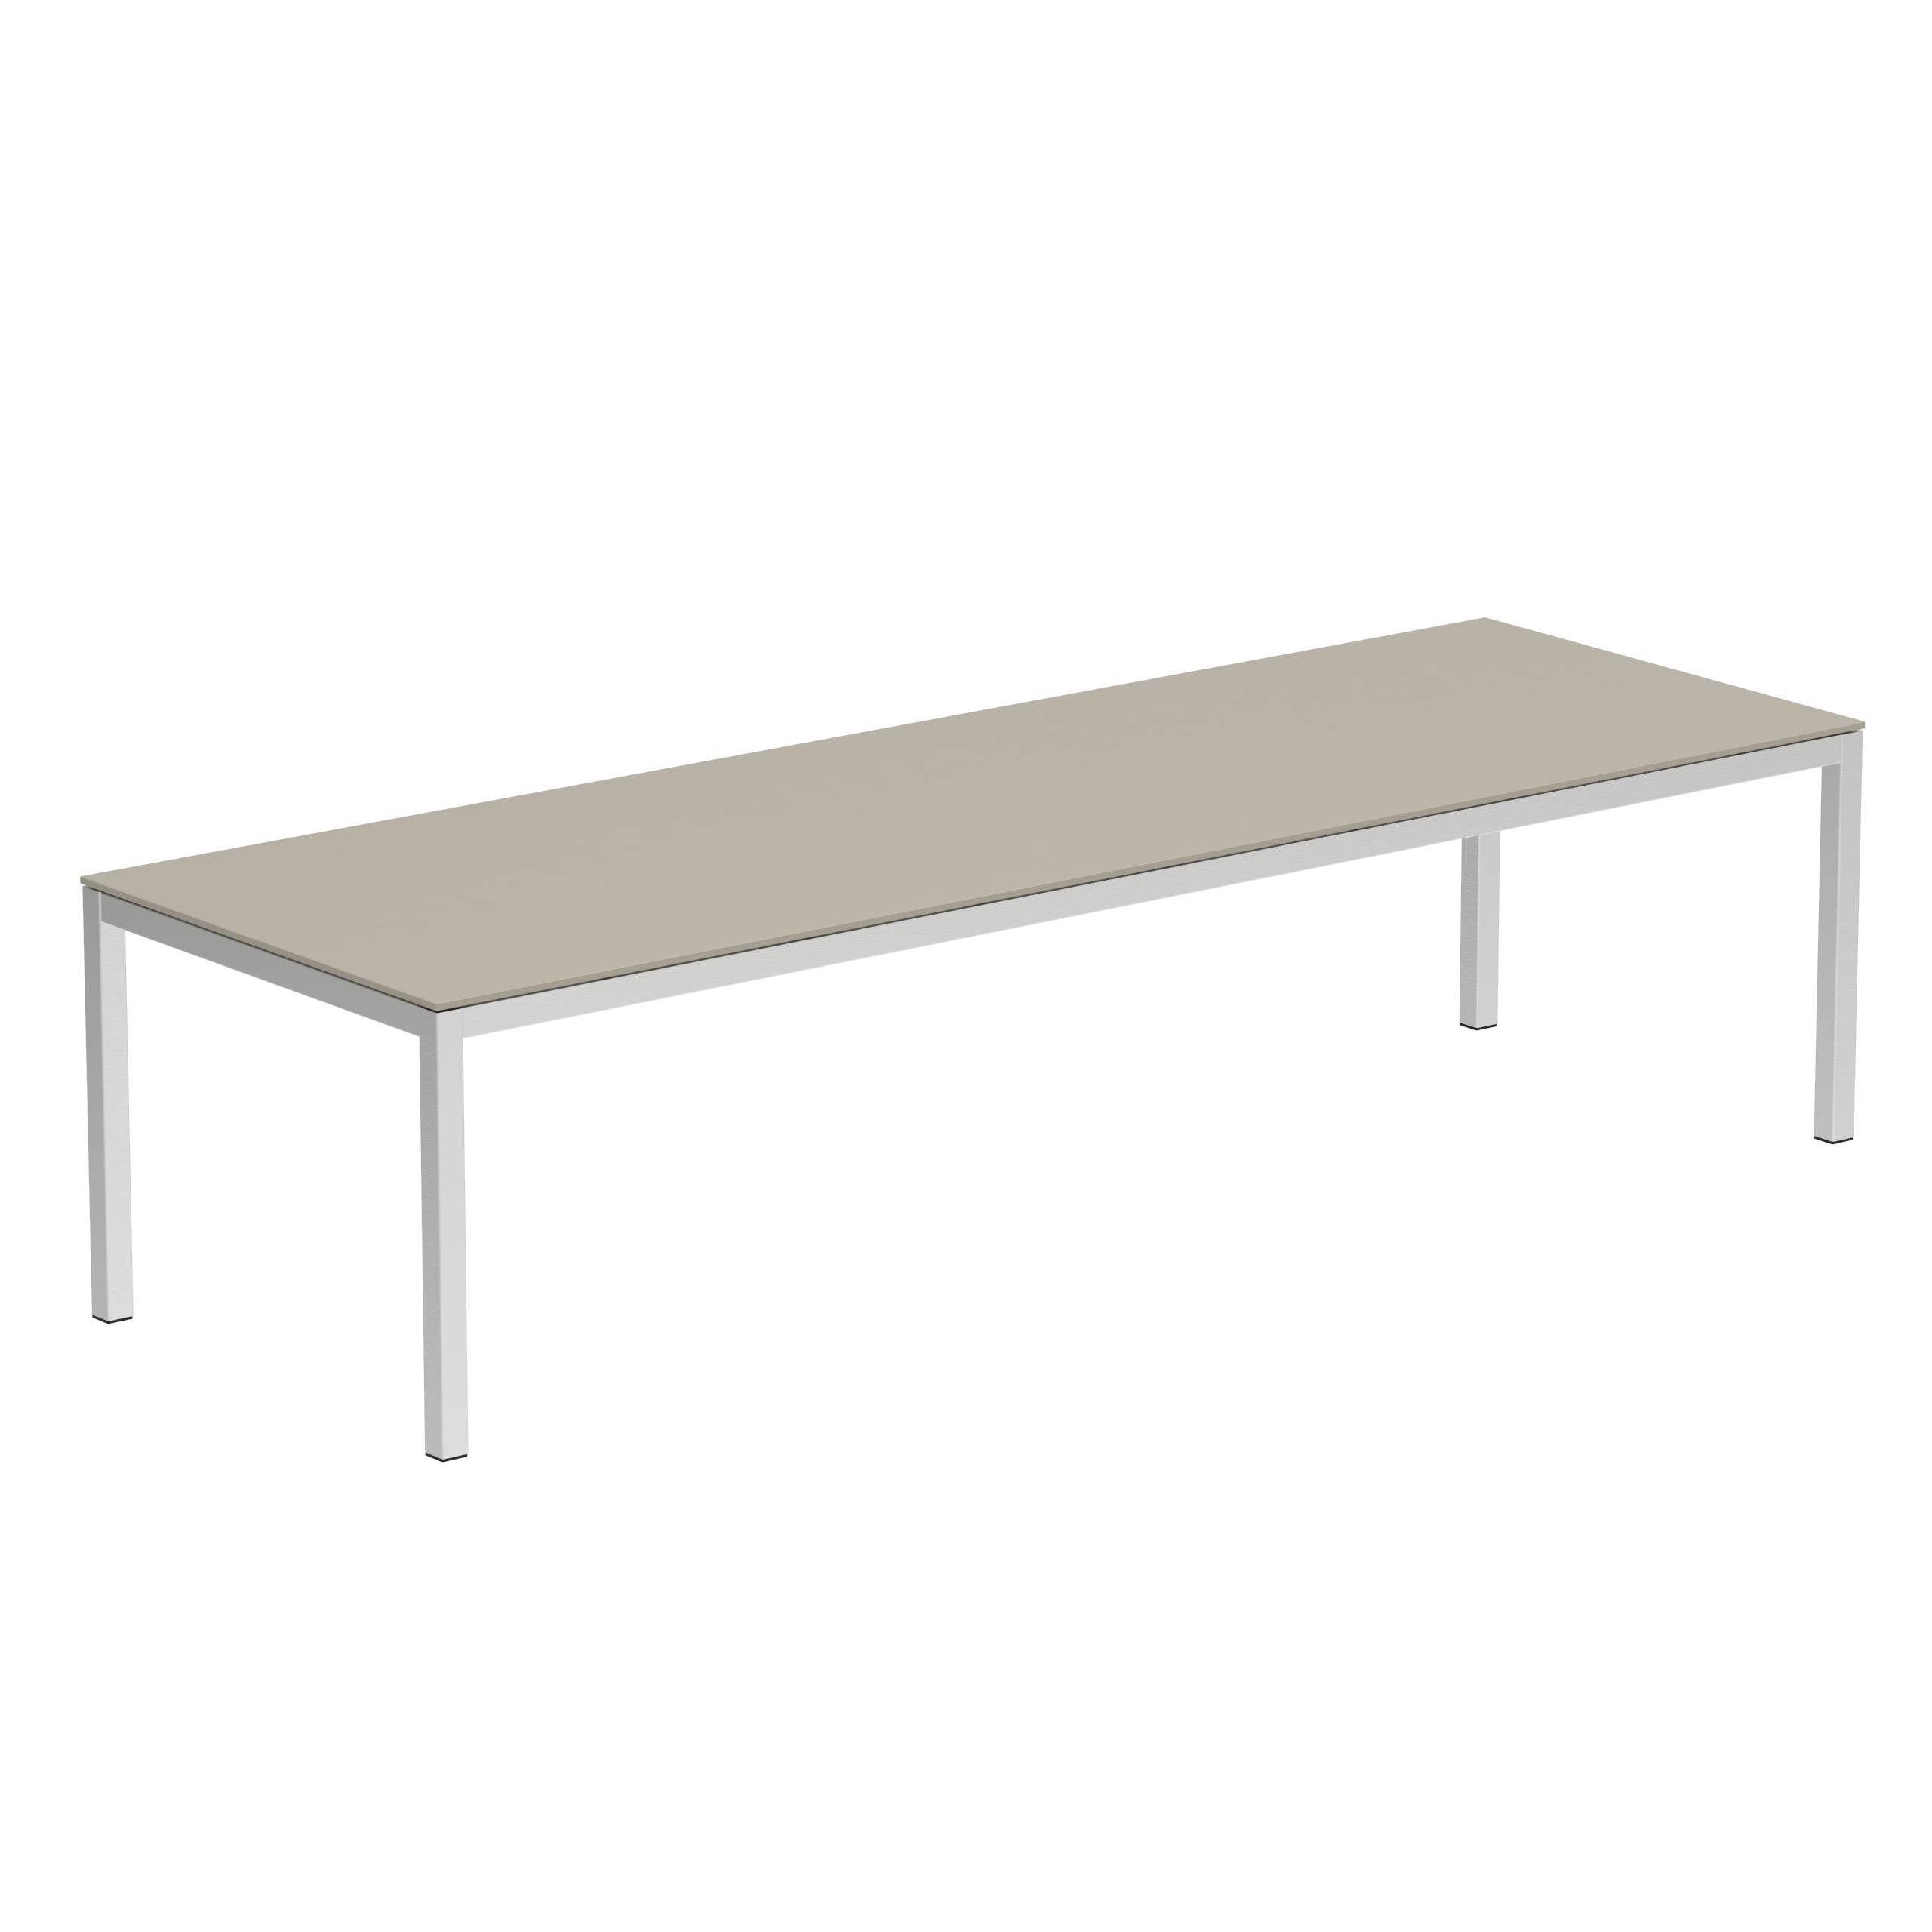 Taboela Table 300x100cm Ss With Top Ceramic Pearl Grey